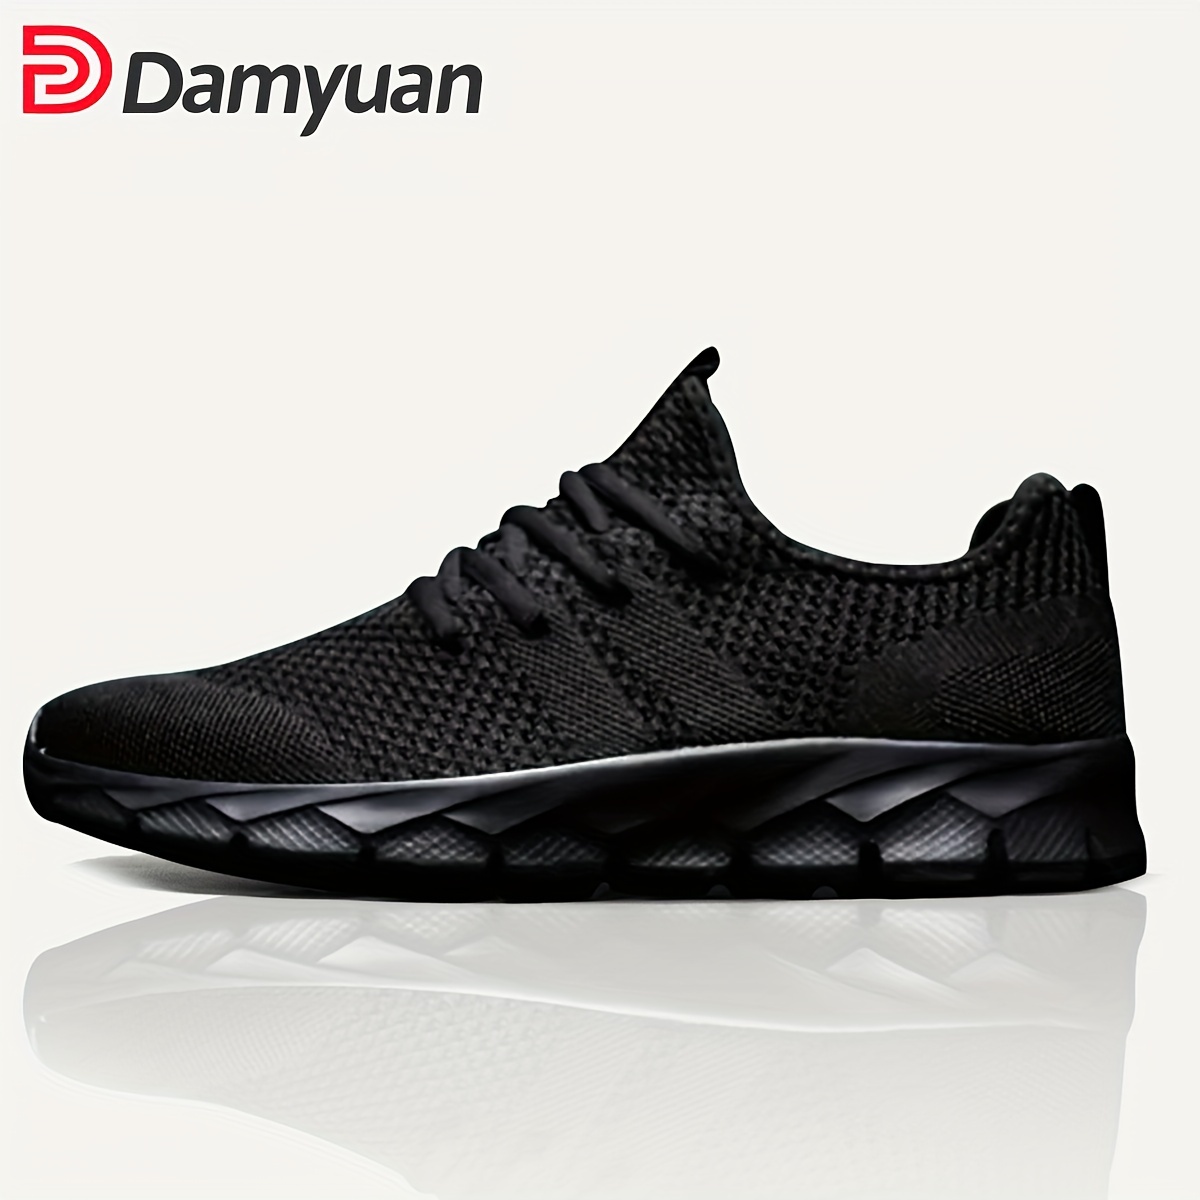 

Men's Running Shoes Lightweight Sneakers - Athletic Shoes - Breathable Lace-ups